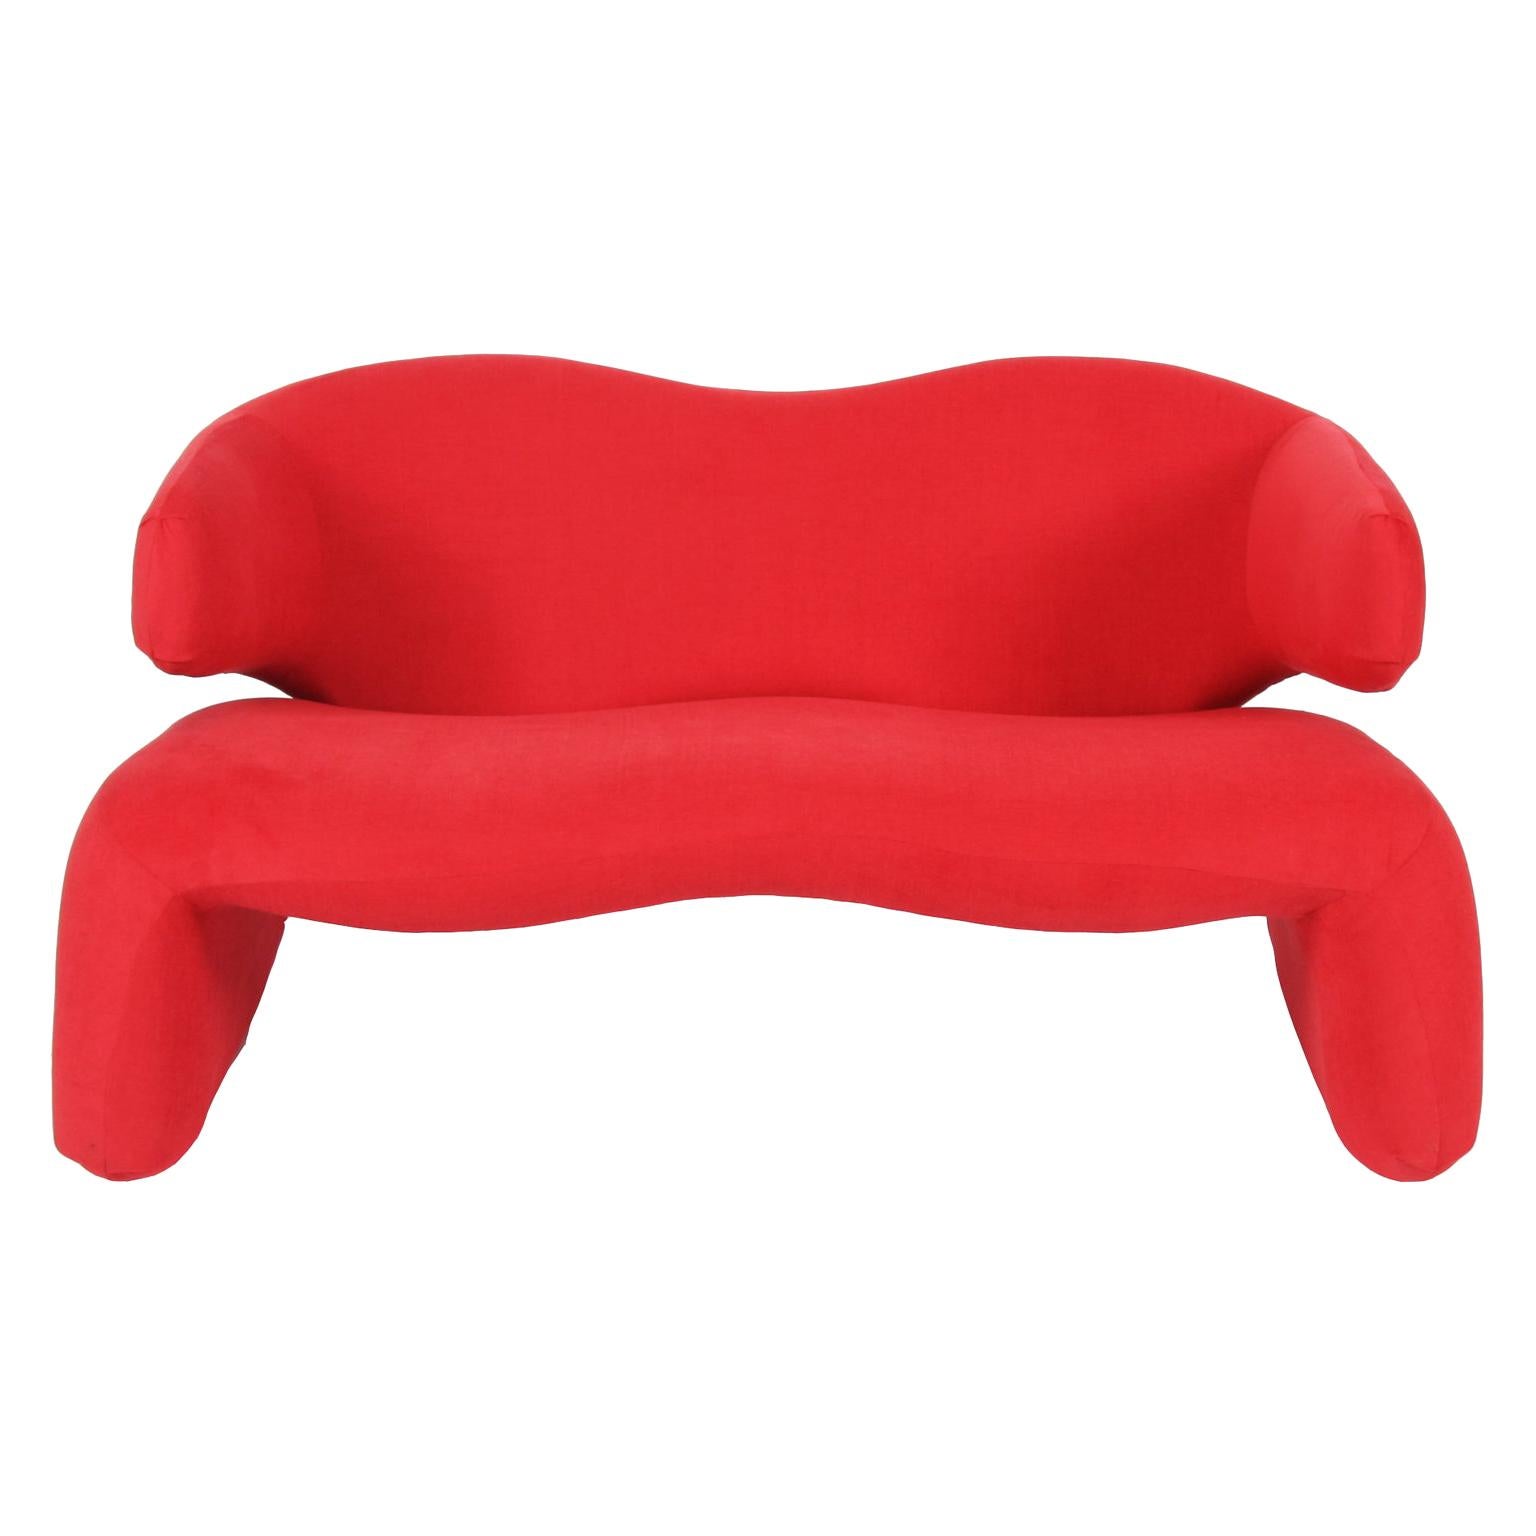 Red Djinn Sofa by Olivier Mourgue, 1965